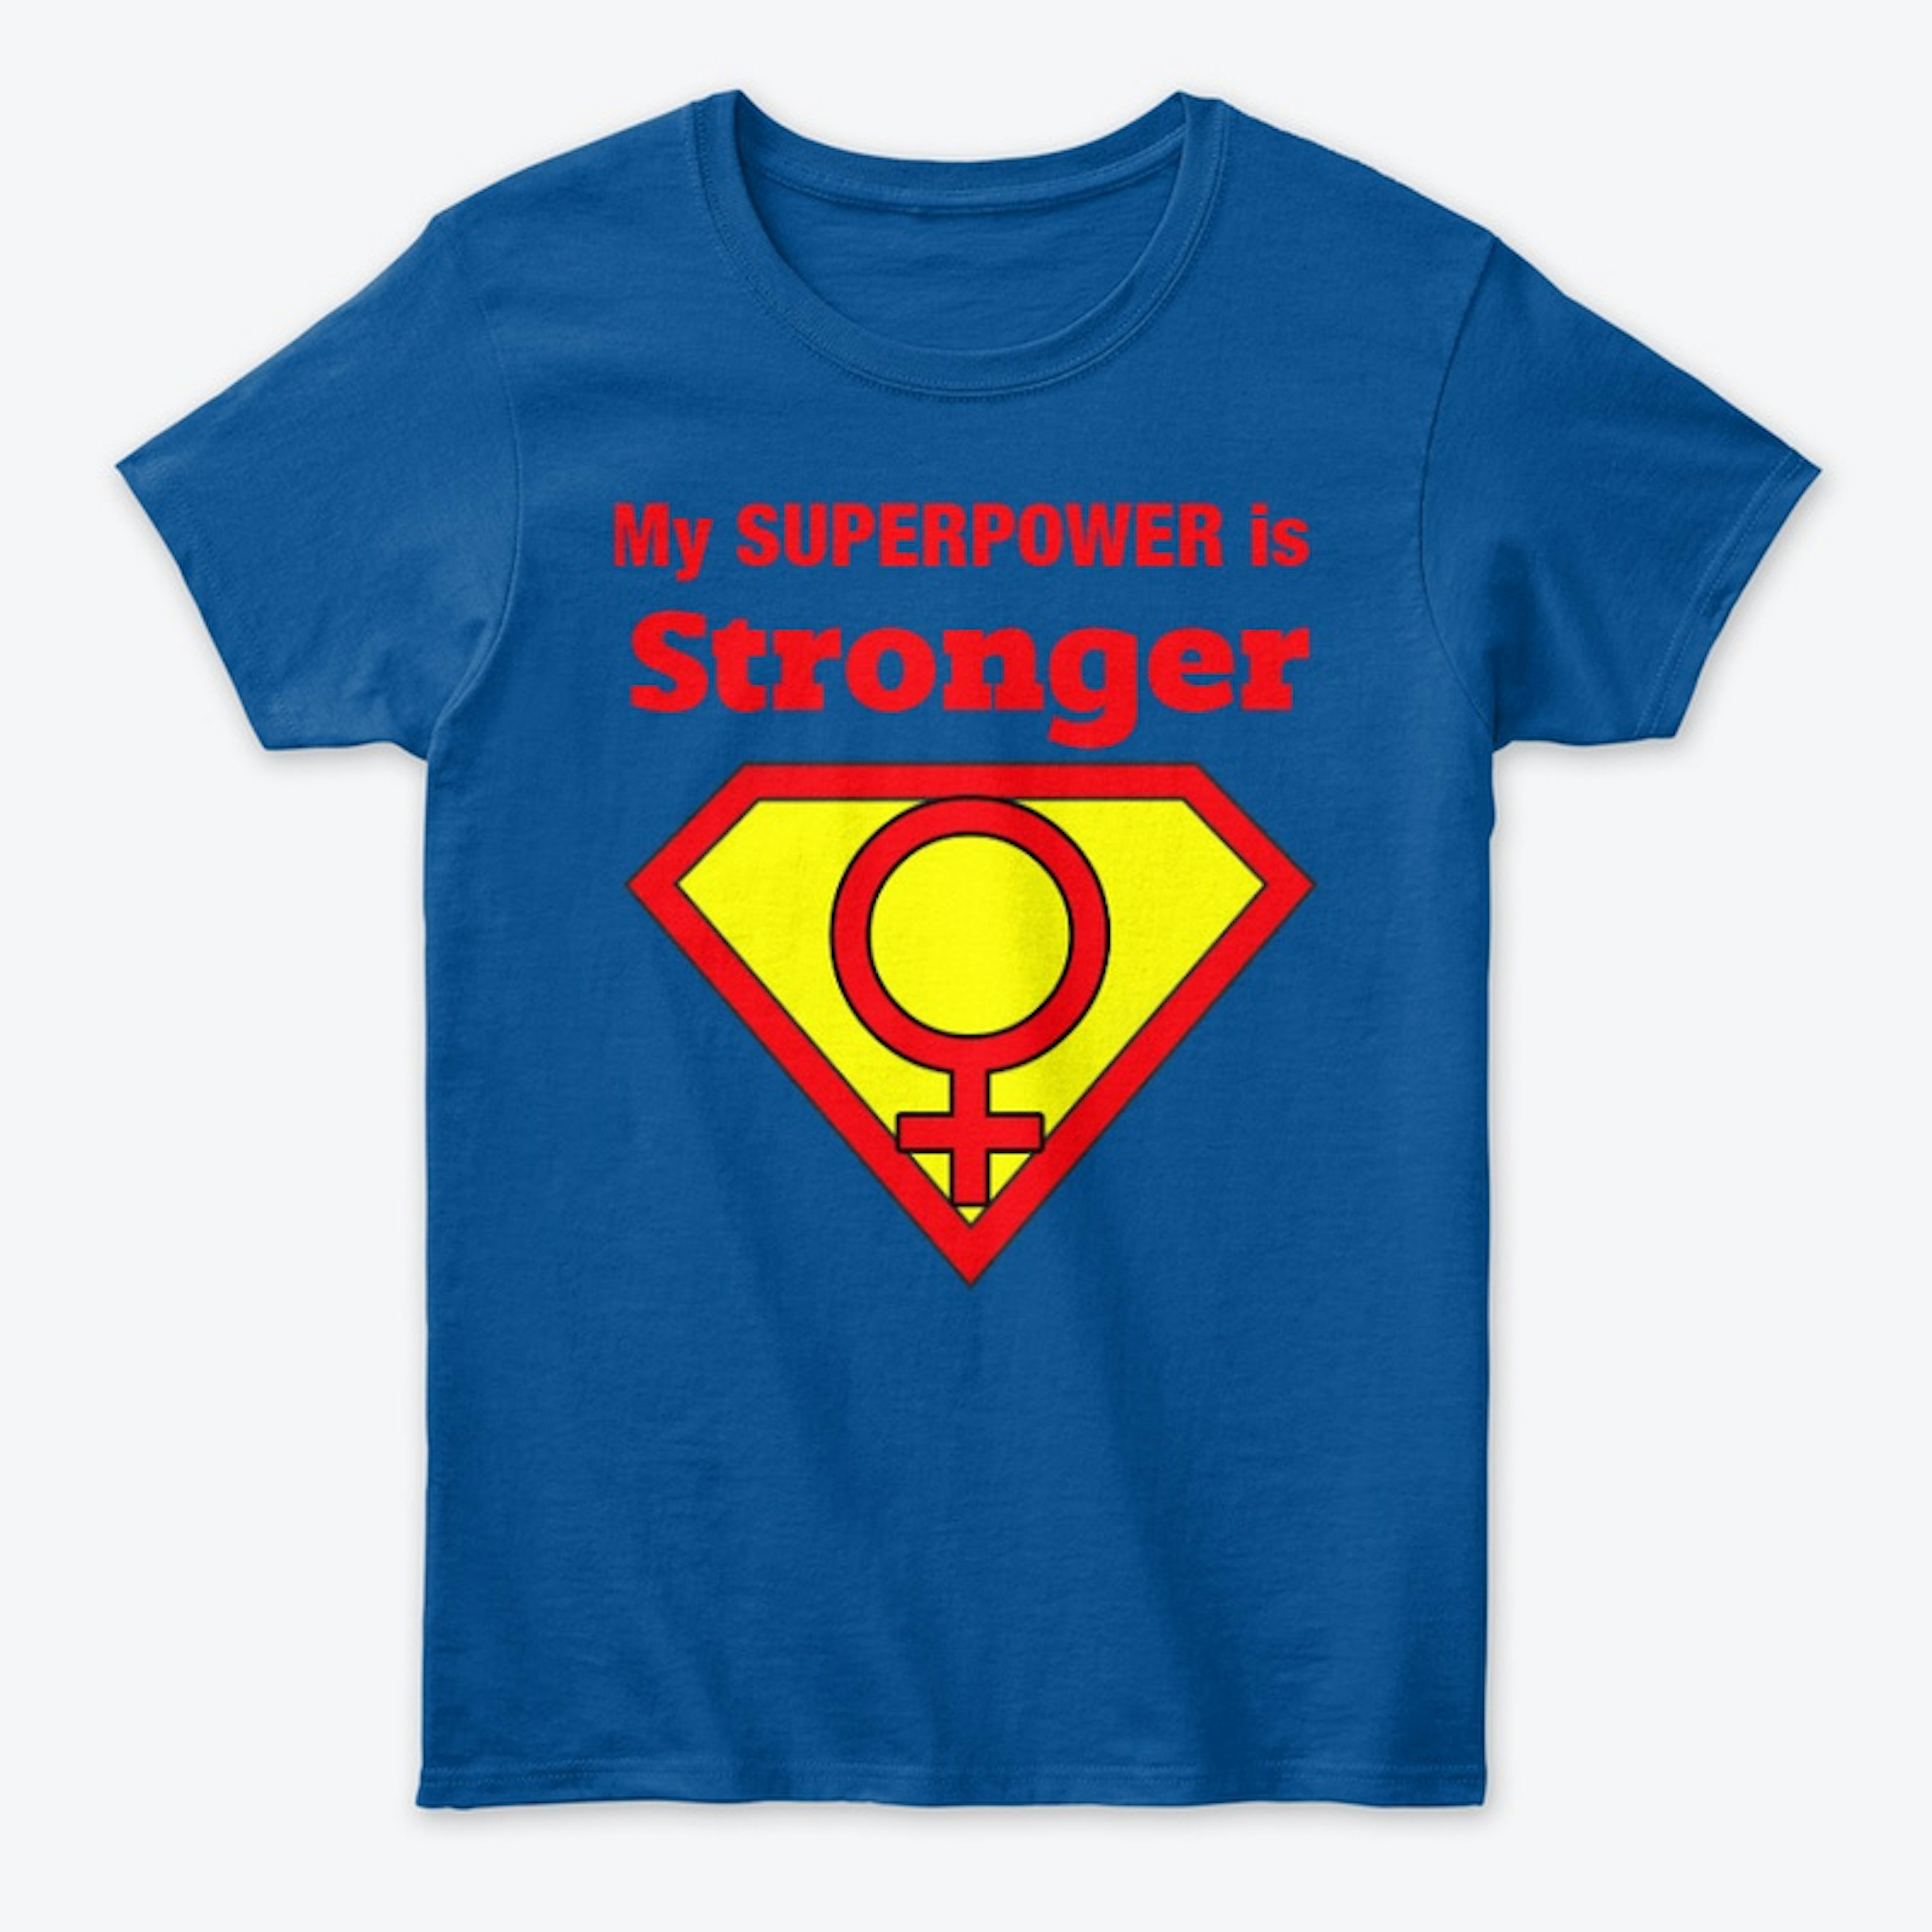 My Superpower is Stonger